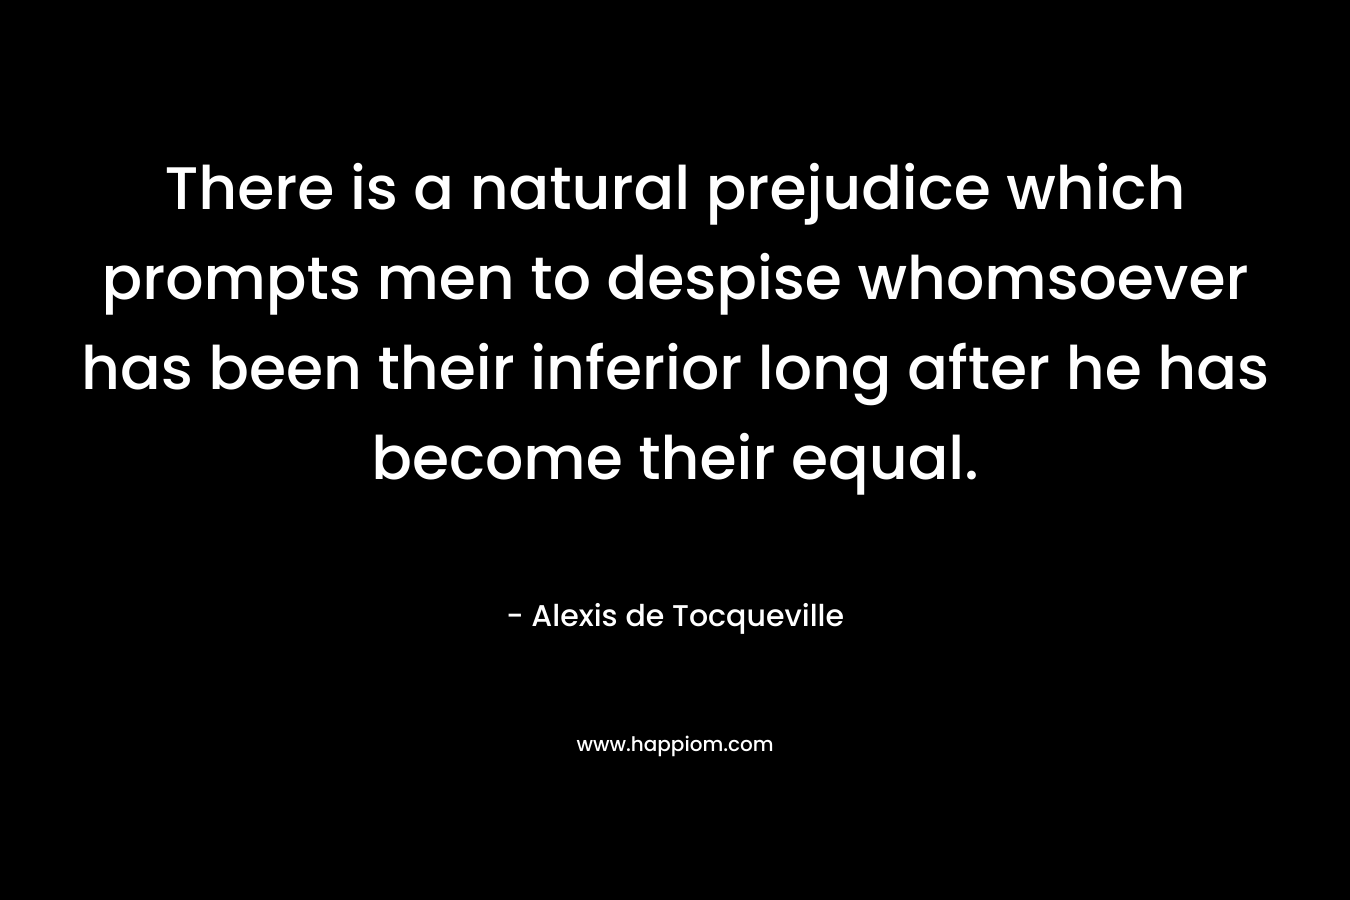 There is a natural prejudice which prompts men to despise whomsoever has been their inferior long after he has become their equal.